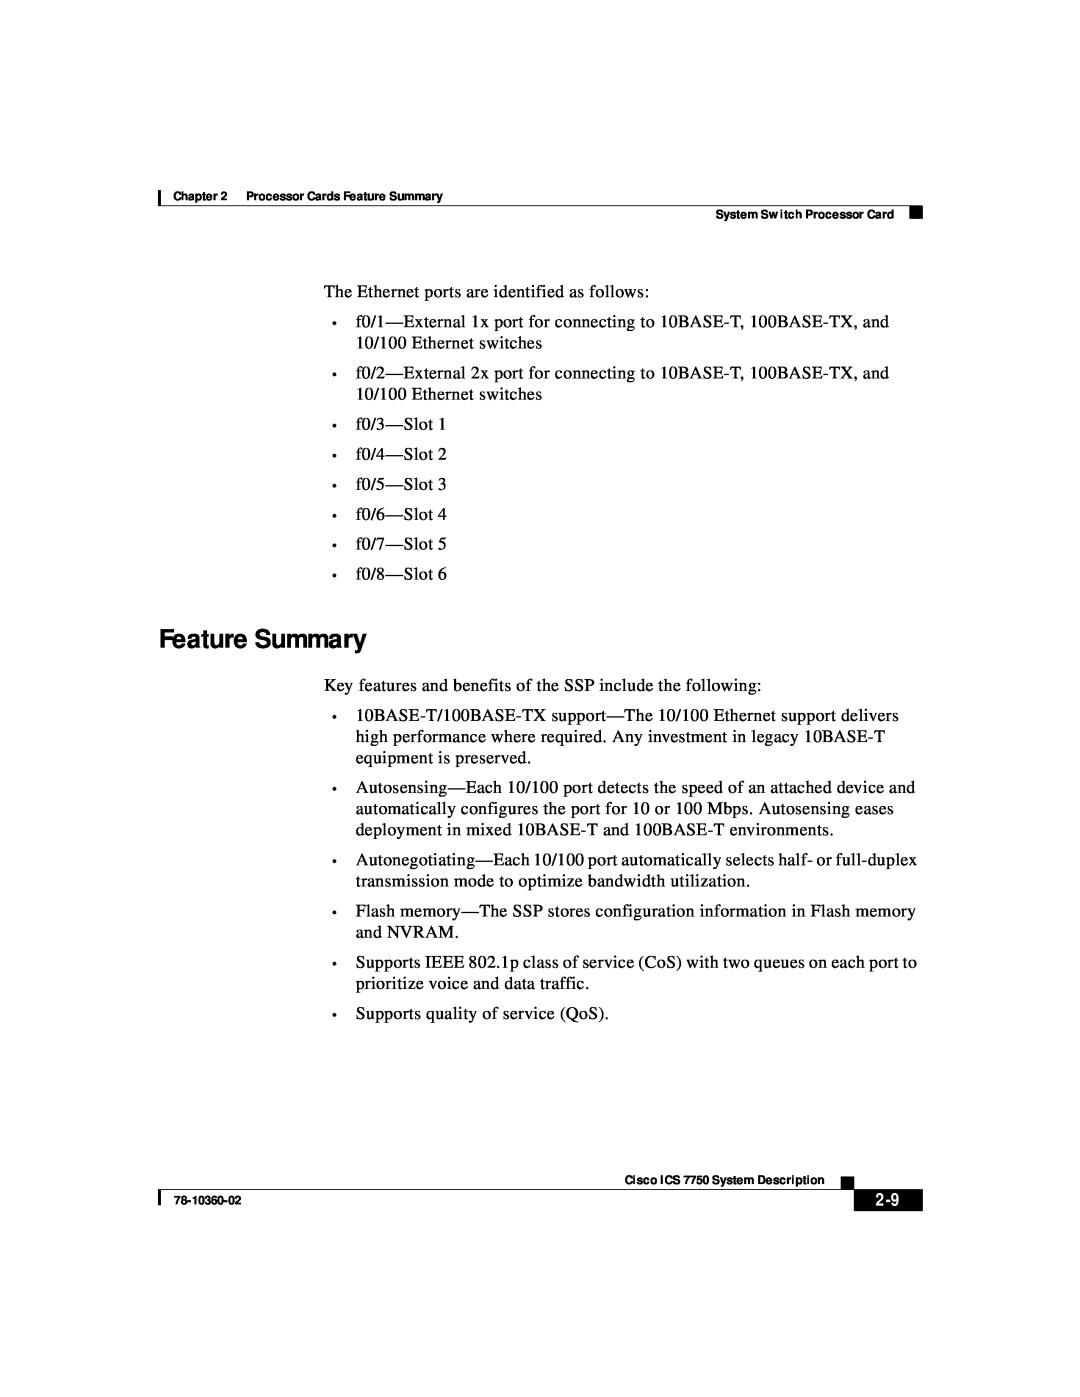 Cisco Systems ICS-7750 manual Feature Summary, The Ethernet ports are identified as follows 